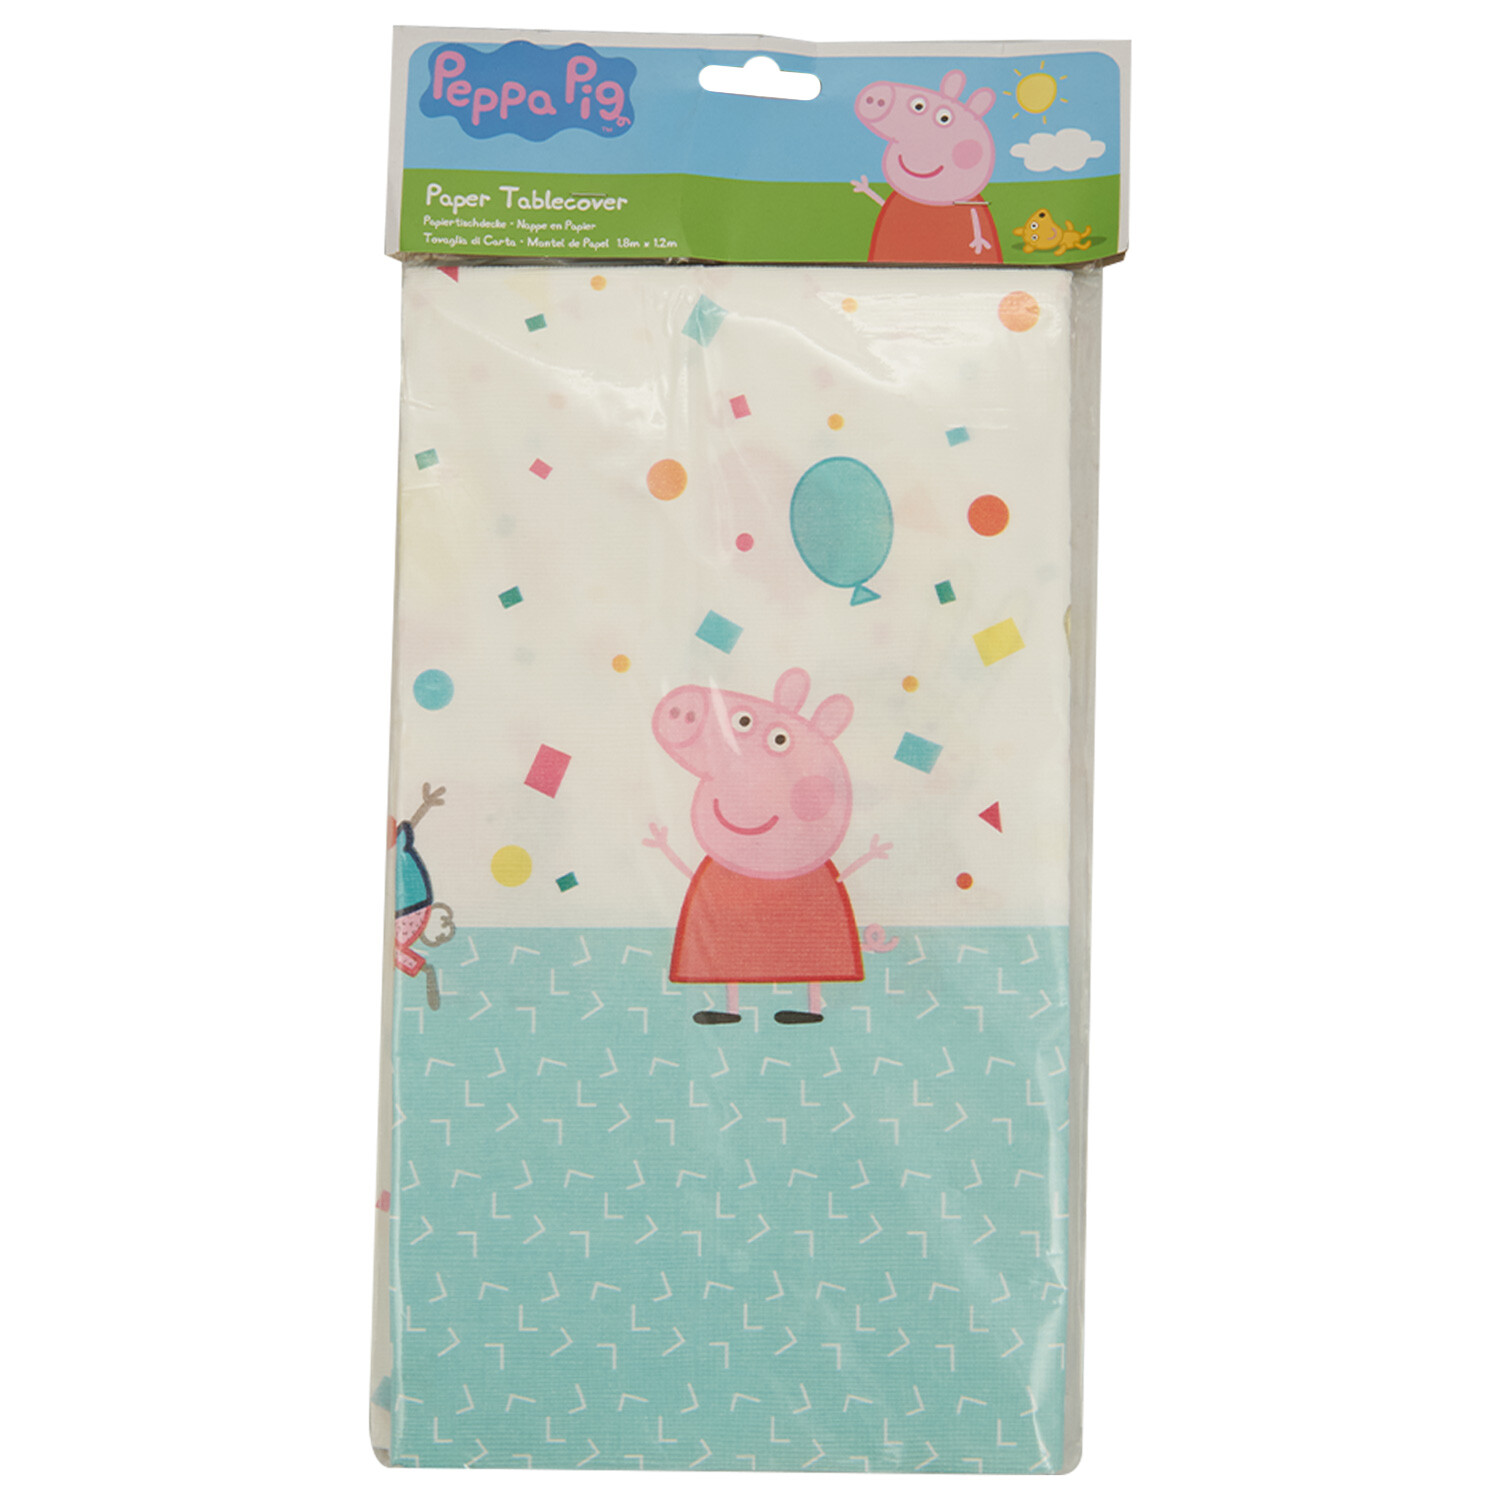 Peppa Pig Paper Tablecover - Blue Image 1